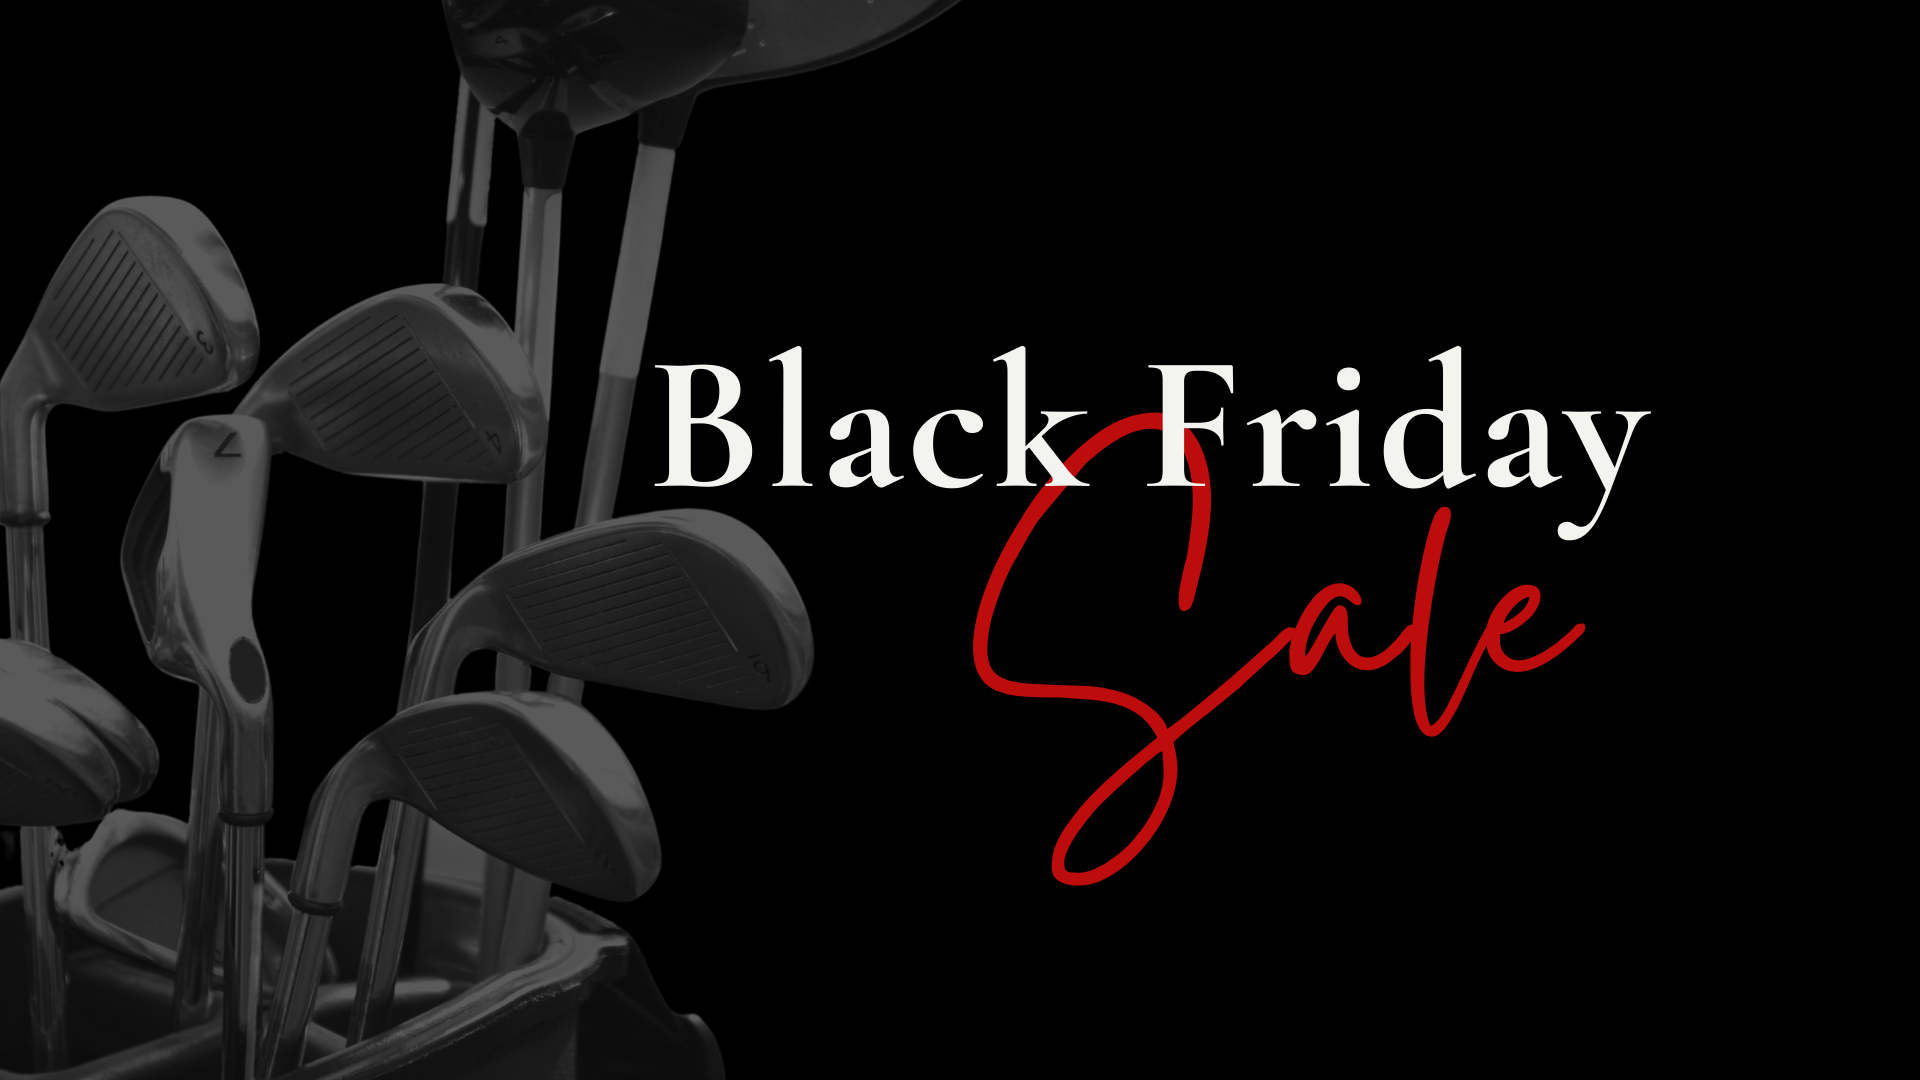 Black Friday Sale at Lakeview